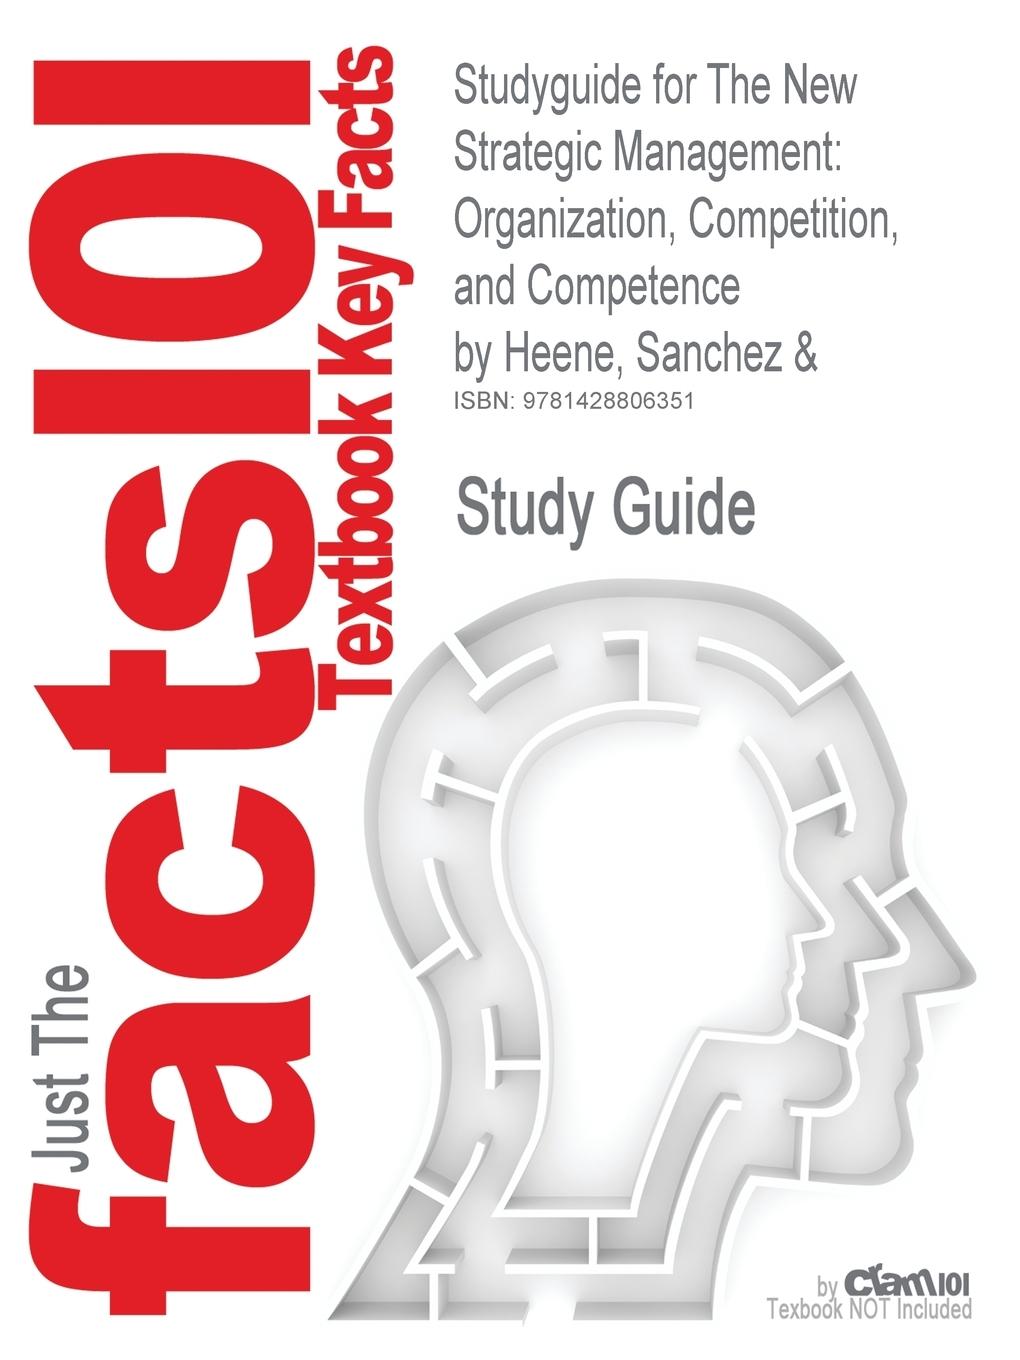 Studyguide for the New Strategic Management - Sanchez and Heene, And Heene|Cram101 Textbook Reviews